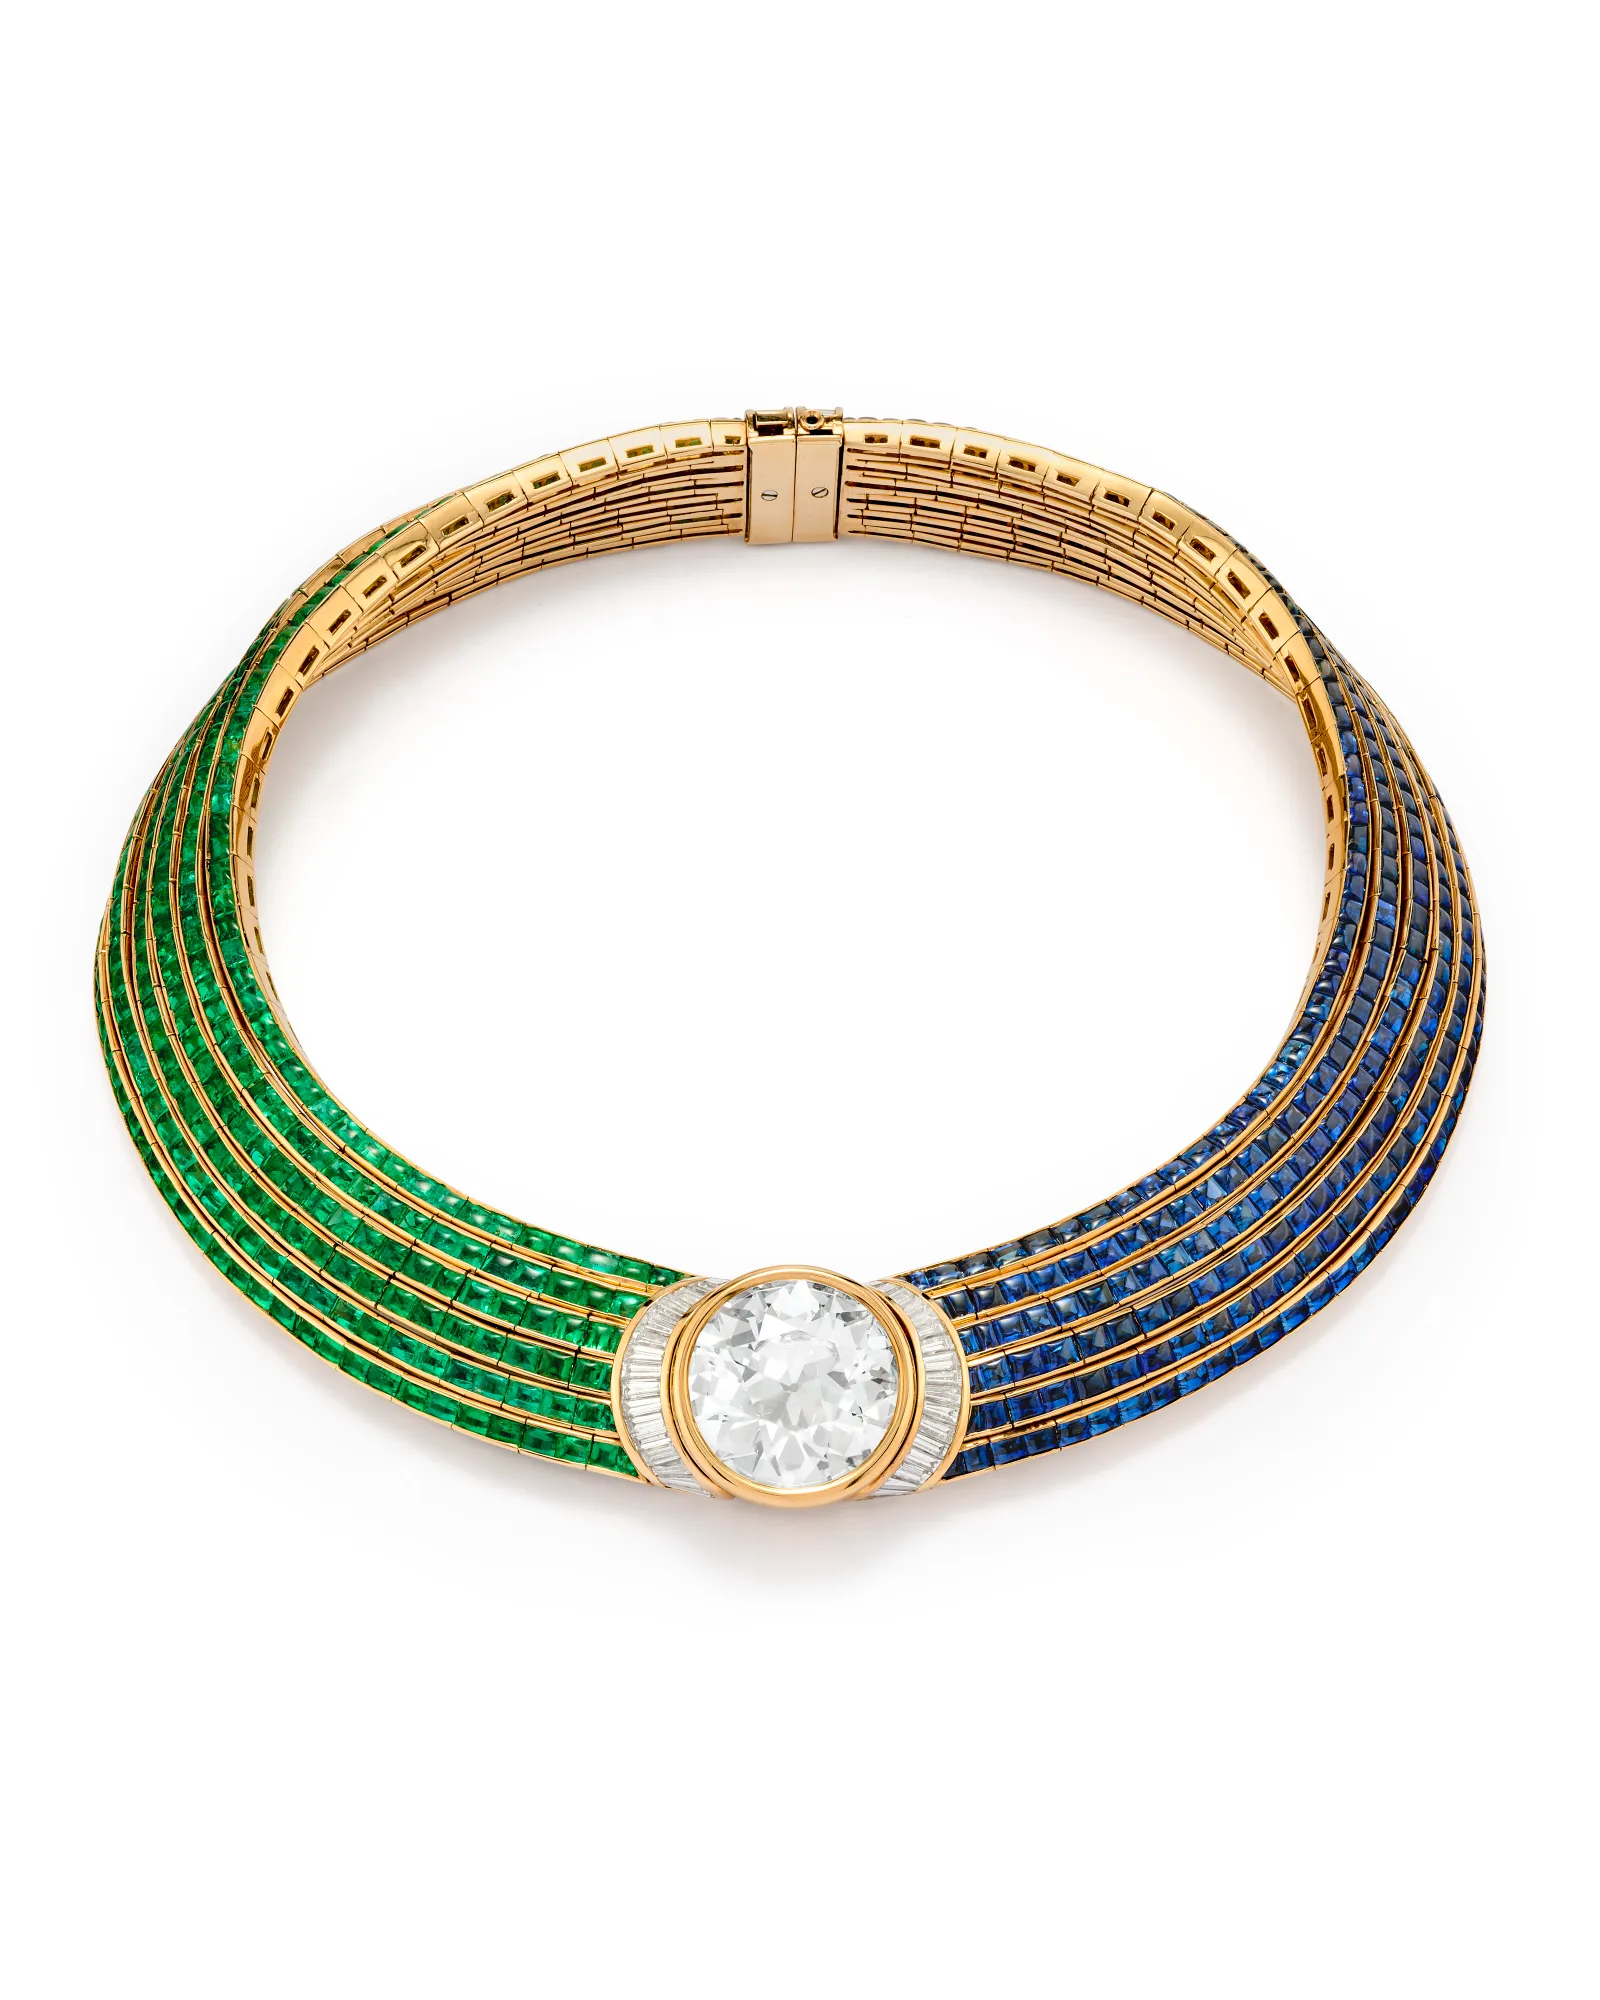 Horten had an enormous collection of Bulgari jewels including this 45.56ct diamond necklace with cabochon sapphires and...